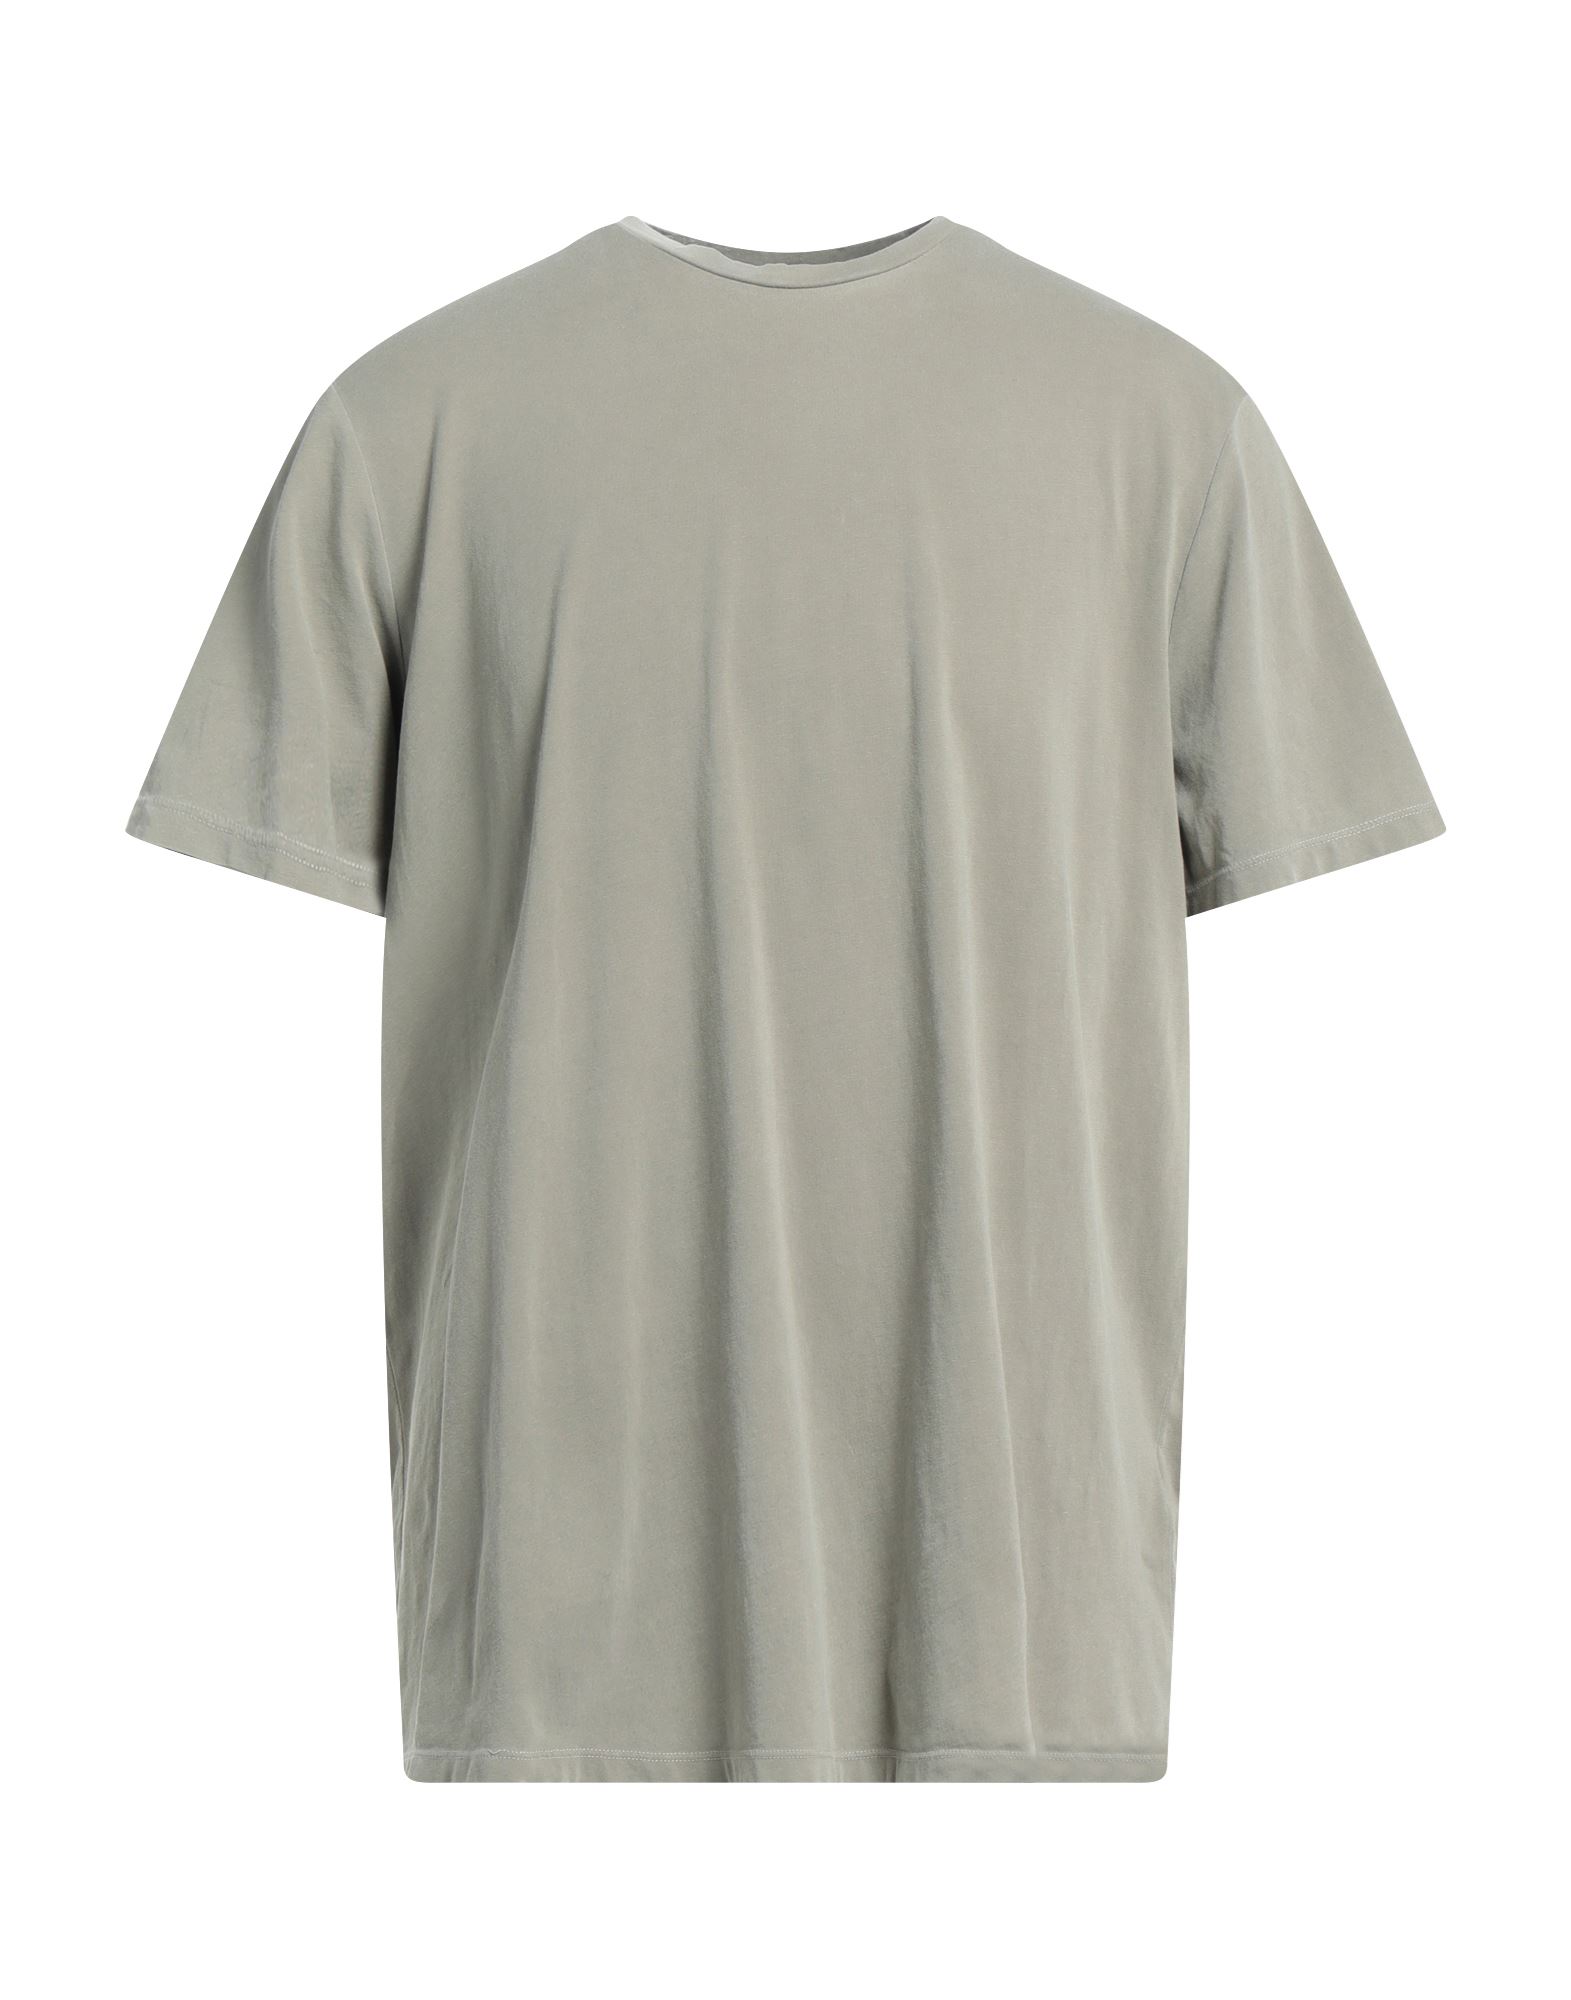 Majestic T-shirts In Sage Green